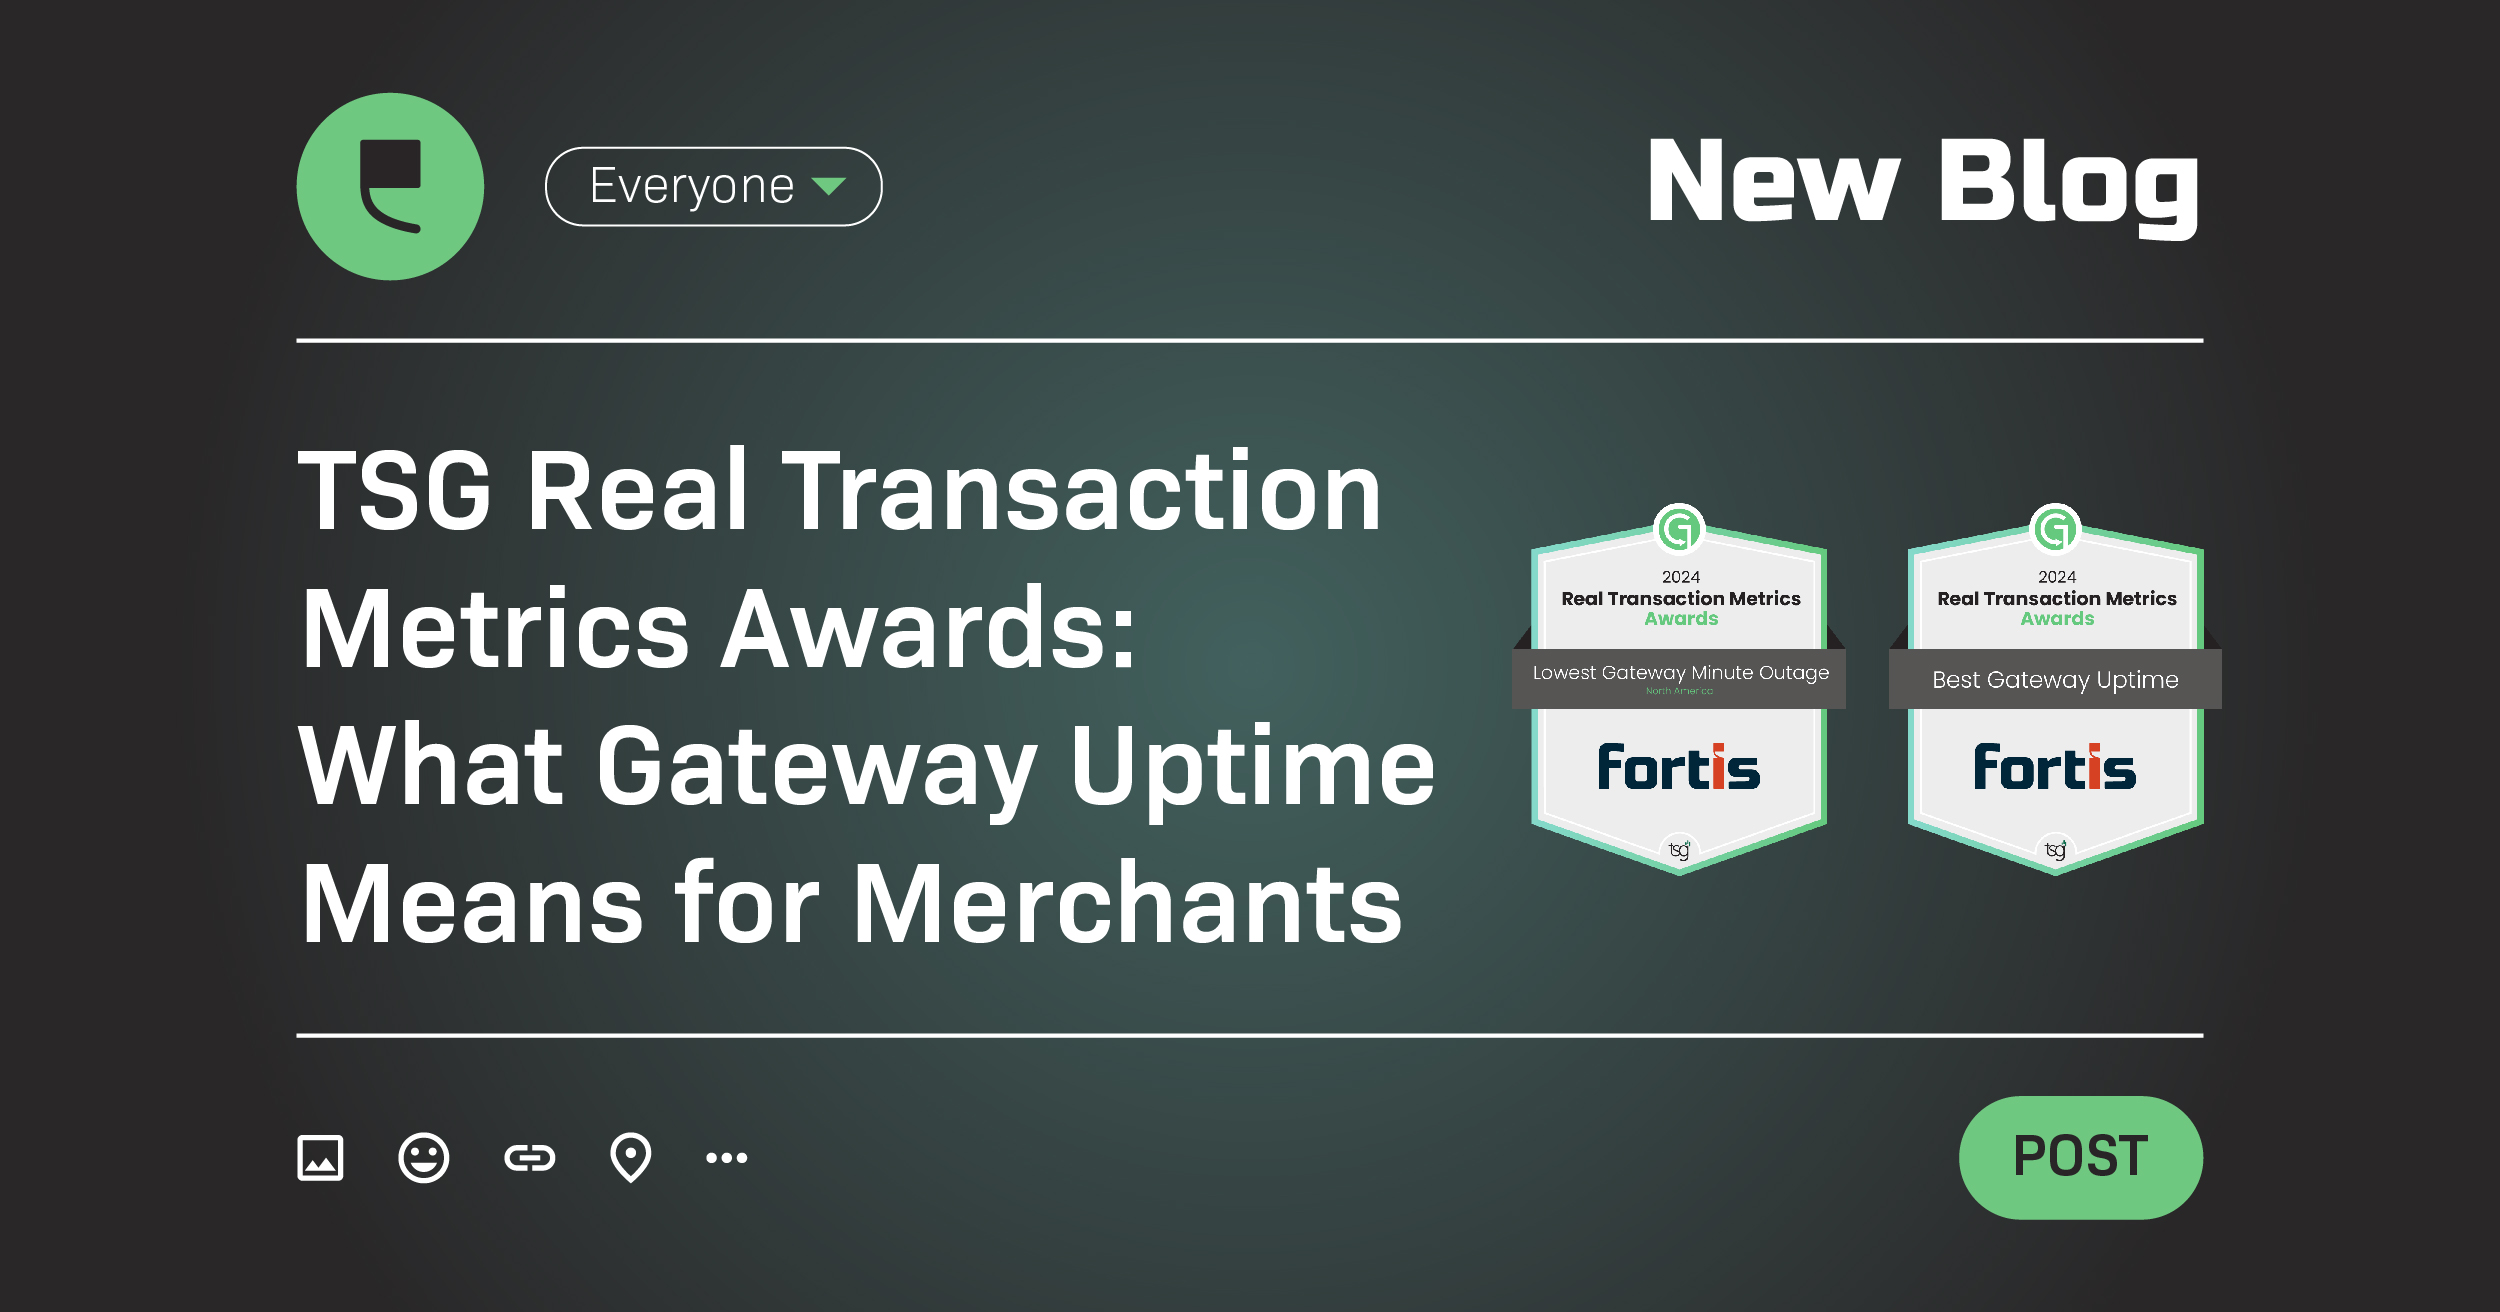 TSG Real Transaction Metrics Awards: What Gateway Uptime Means for Merchants  - Featured Image